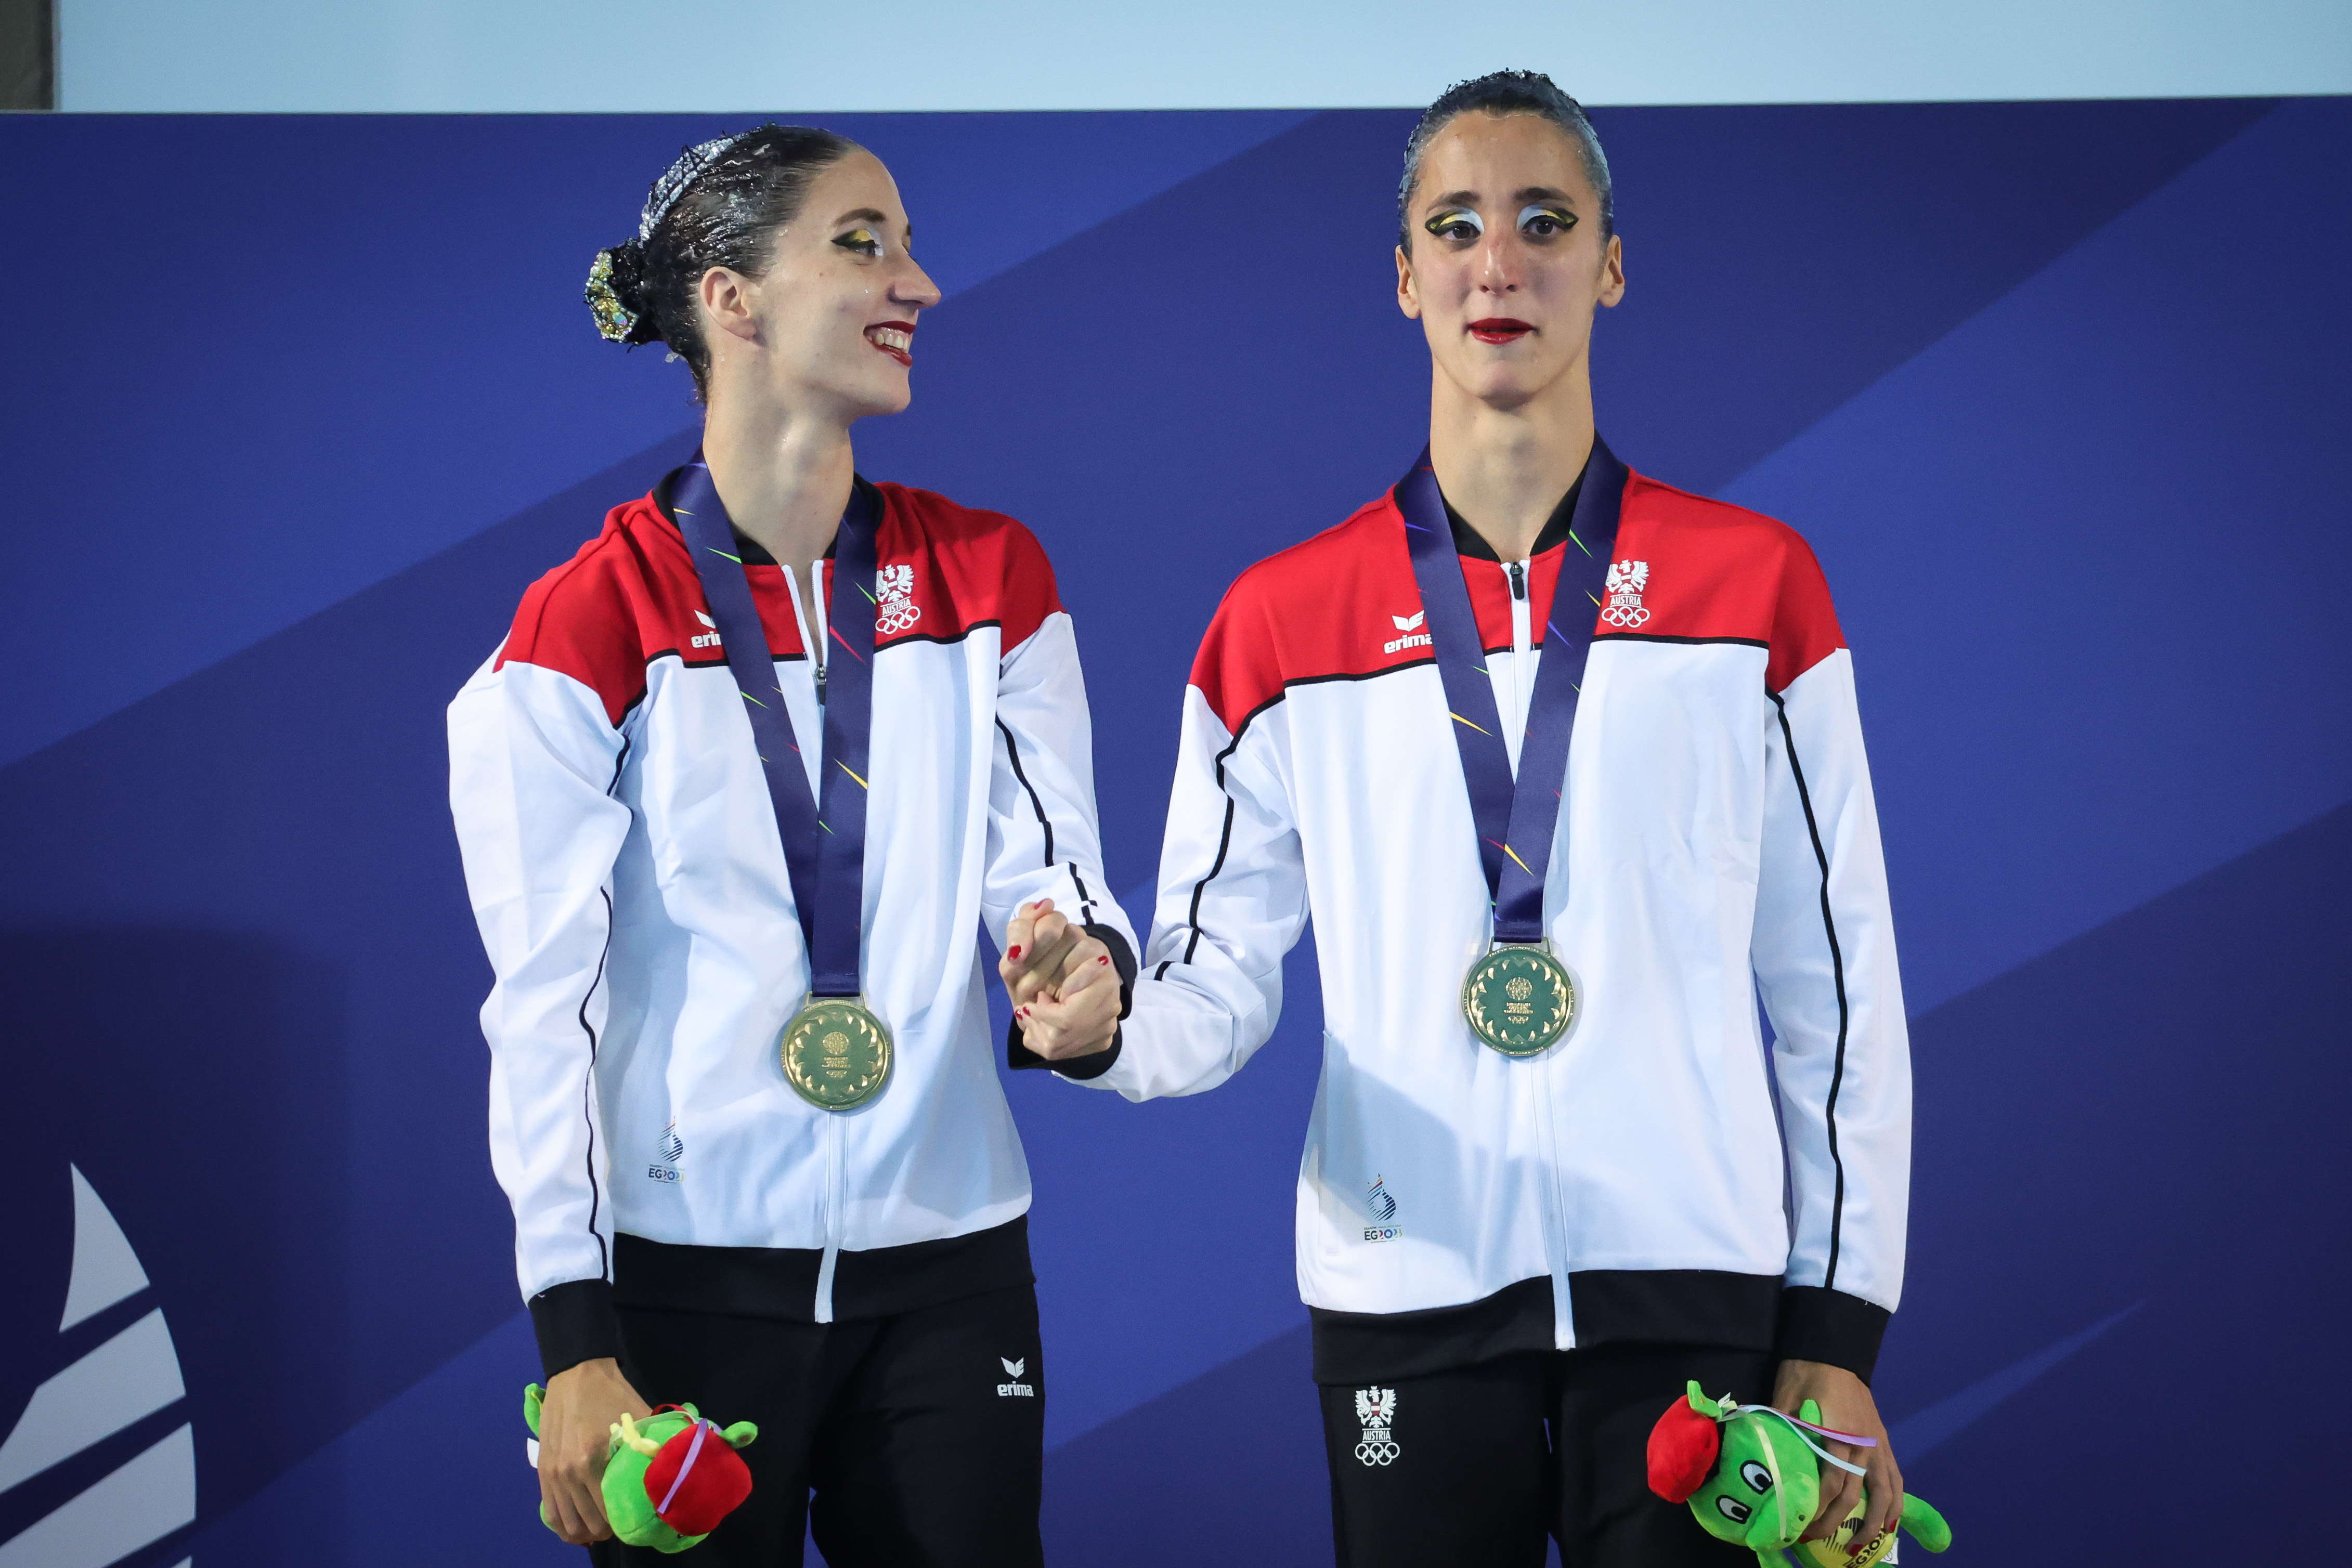 Austria Claims Duet Quota to Paris Olympics, France and Spain Make History